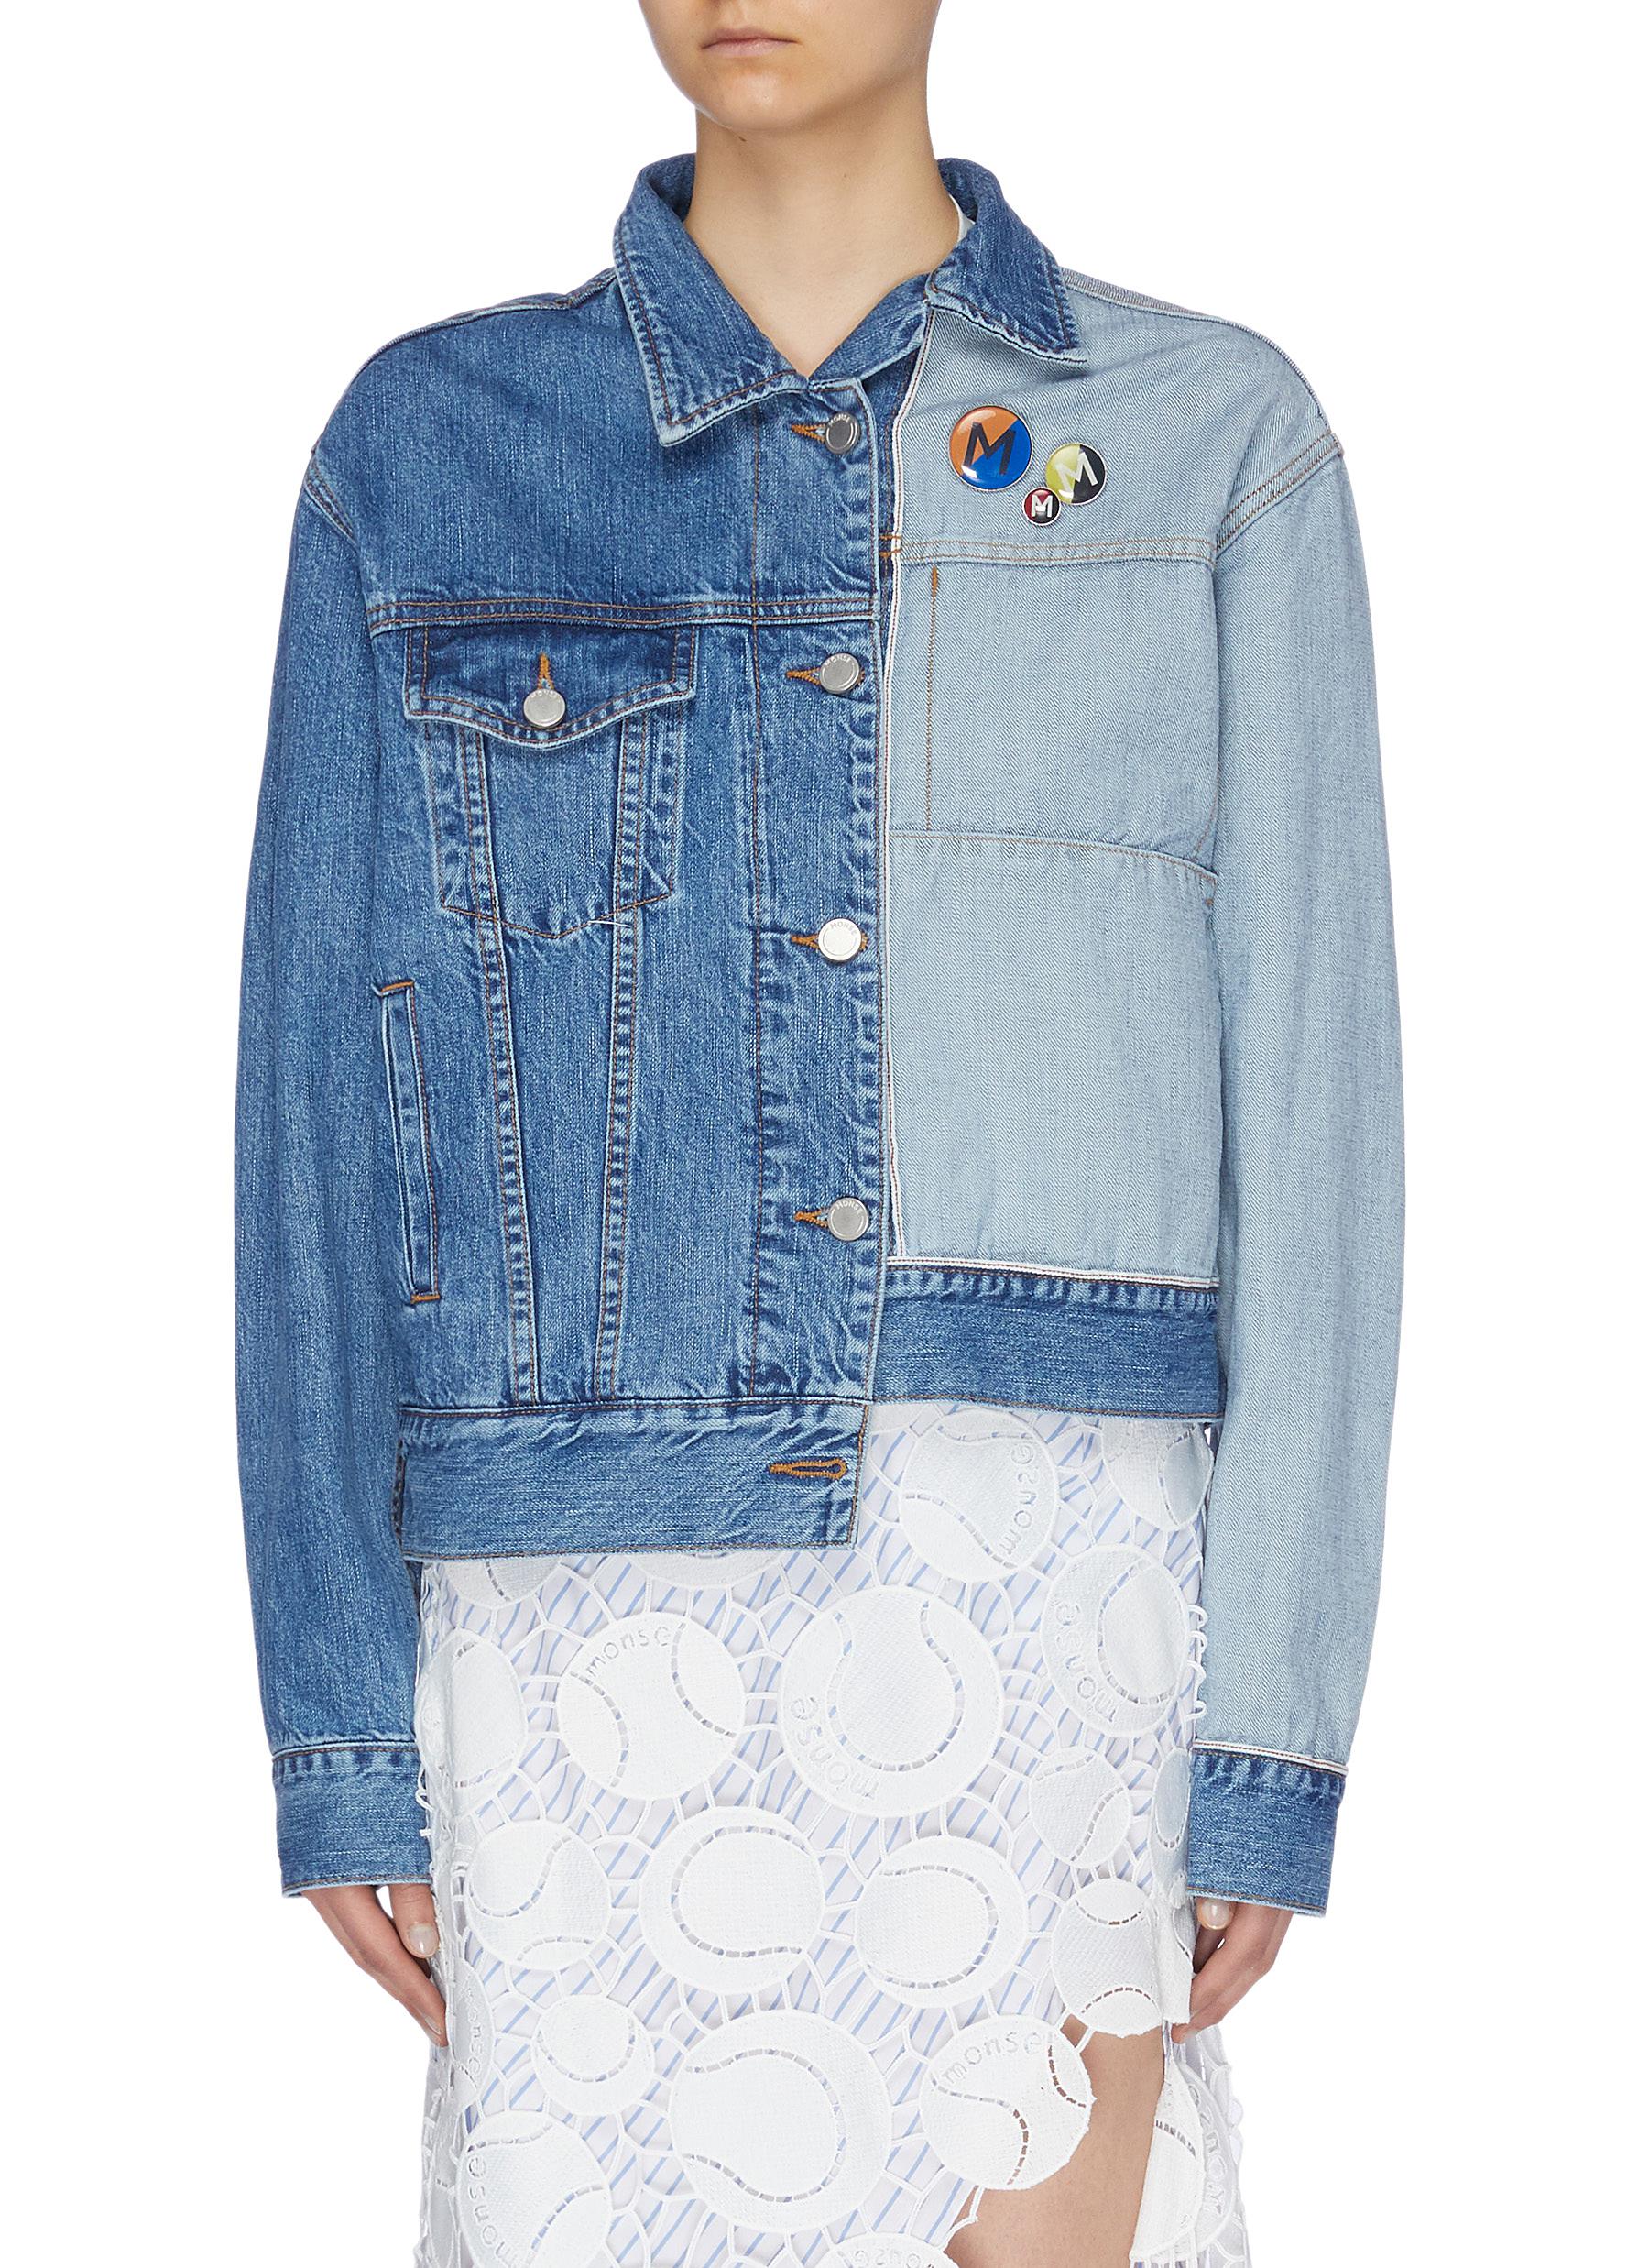 Staggered inside-out patchwork denim jacket by Monse | Coshio Online Shop